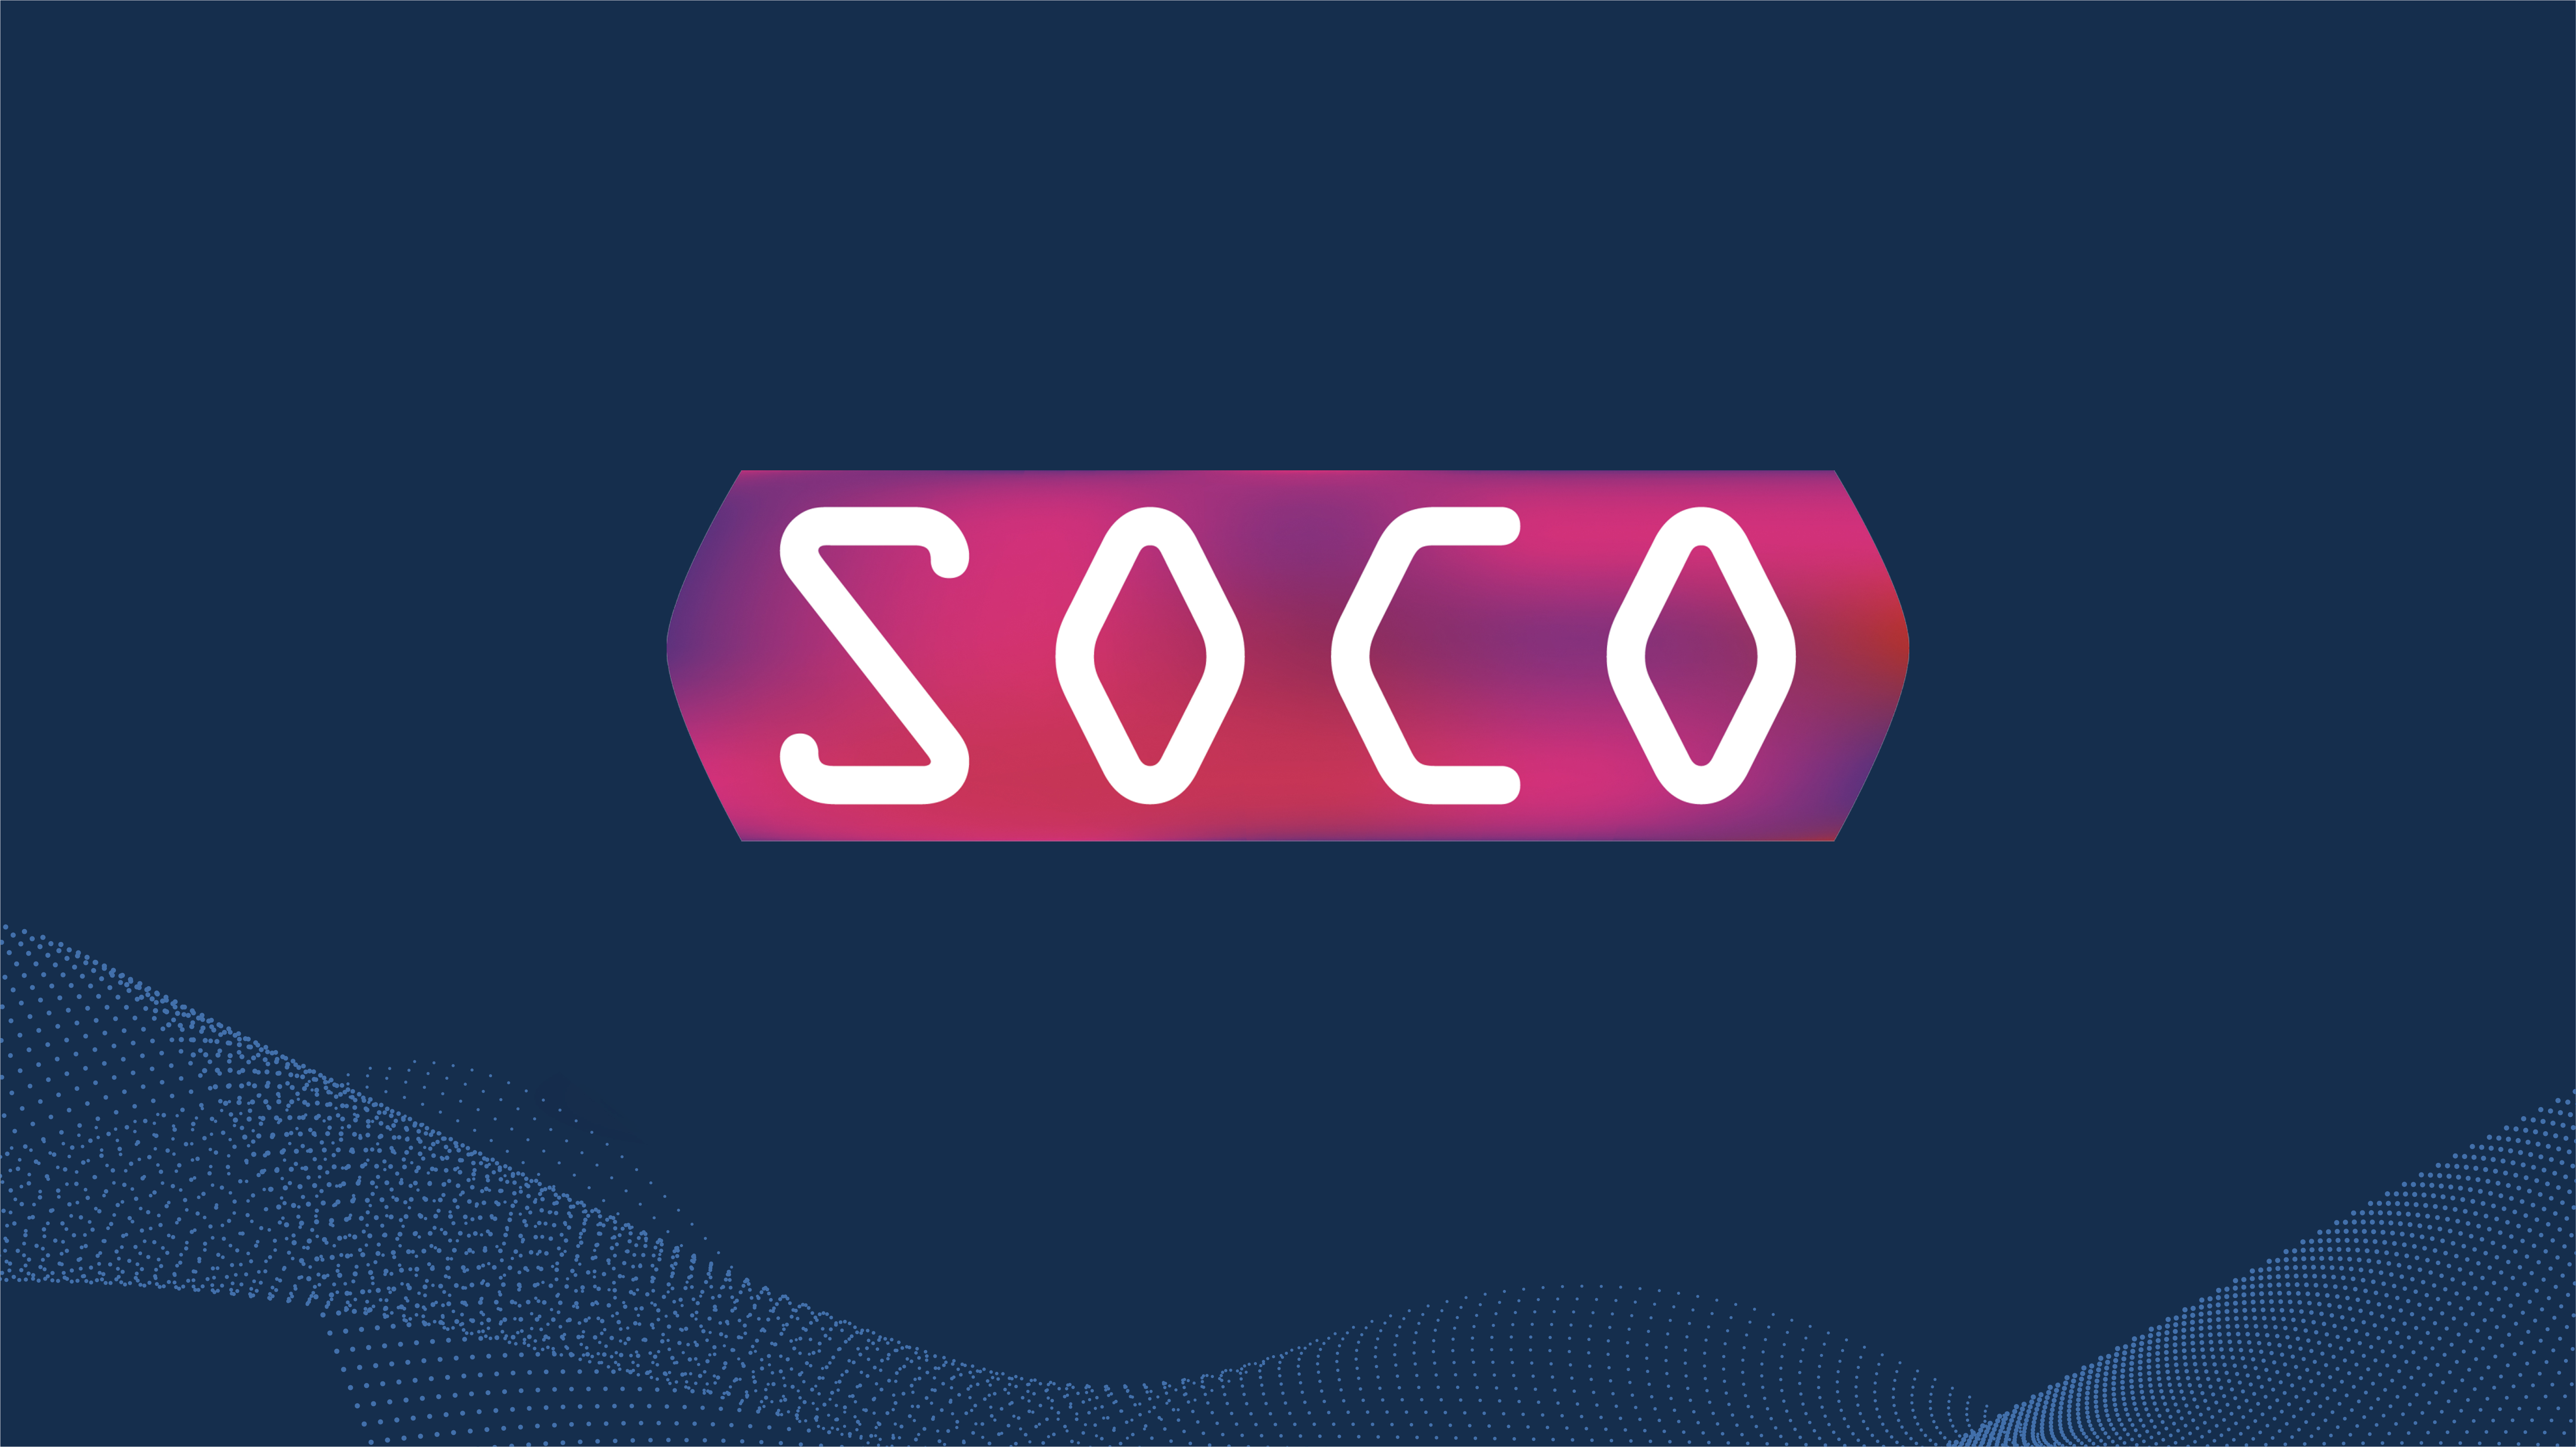 Call for Papers for SOCO’21 Special Session: “Challenges and new approaches towards Artificial Intelligence deployments in real-world scenarios”